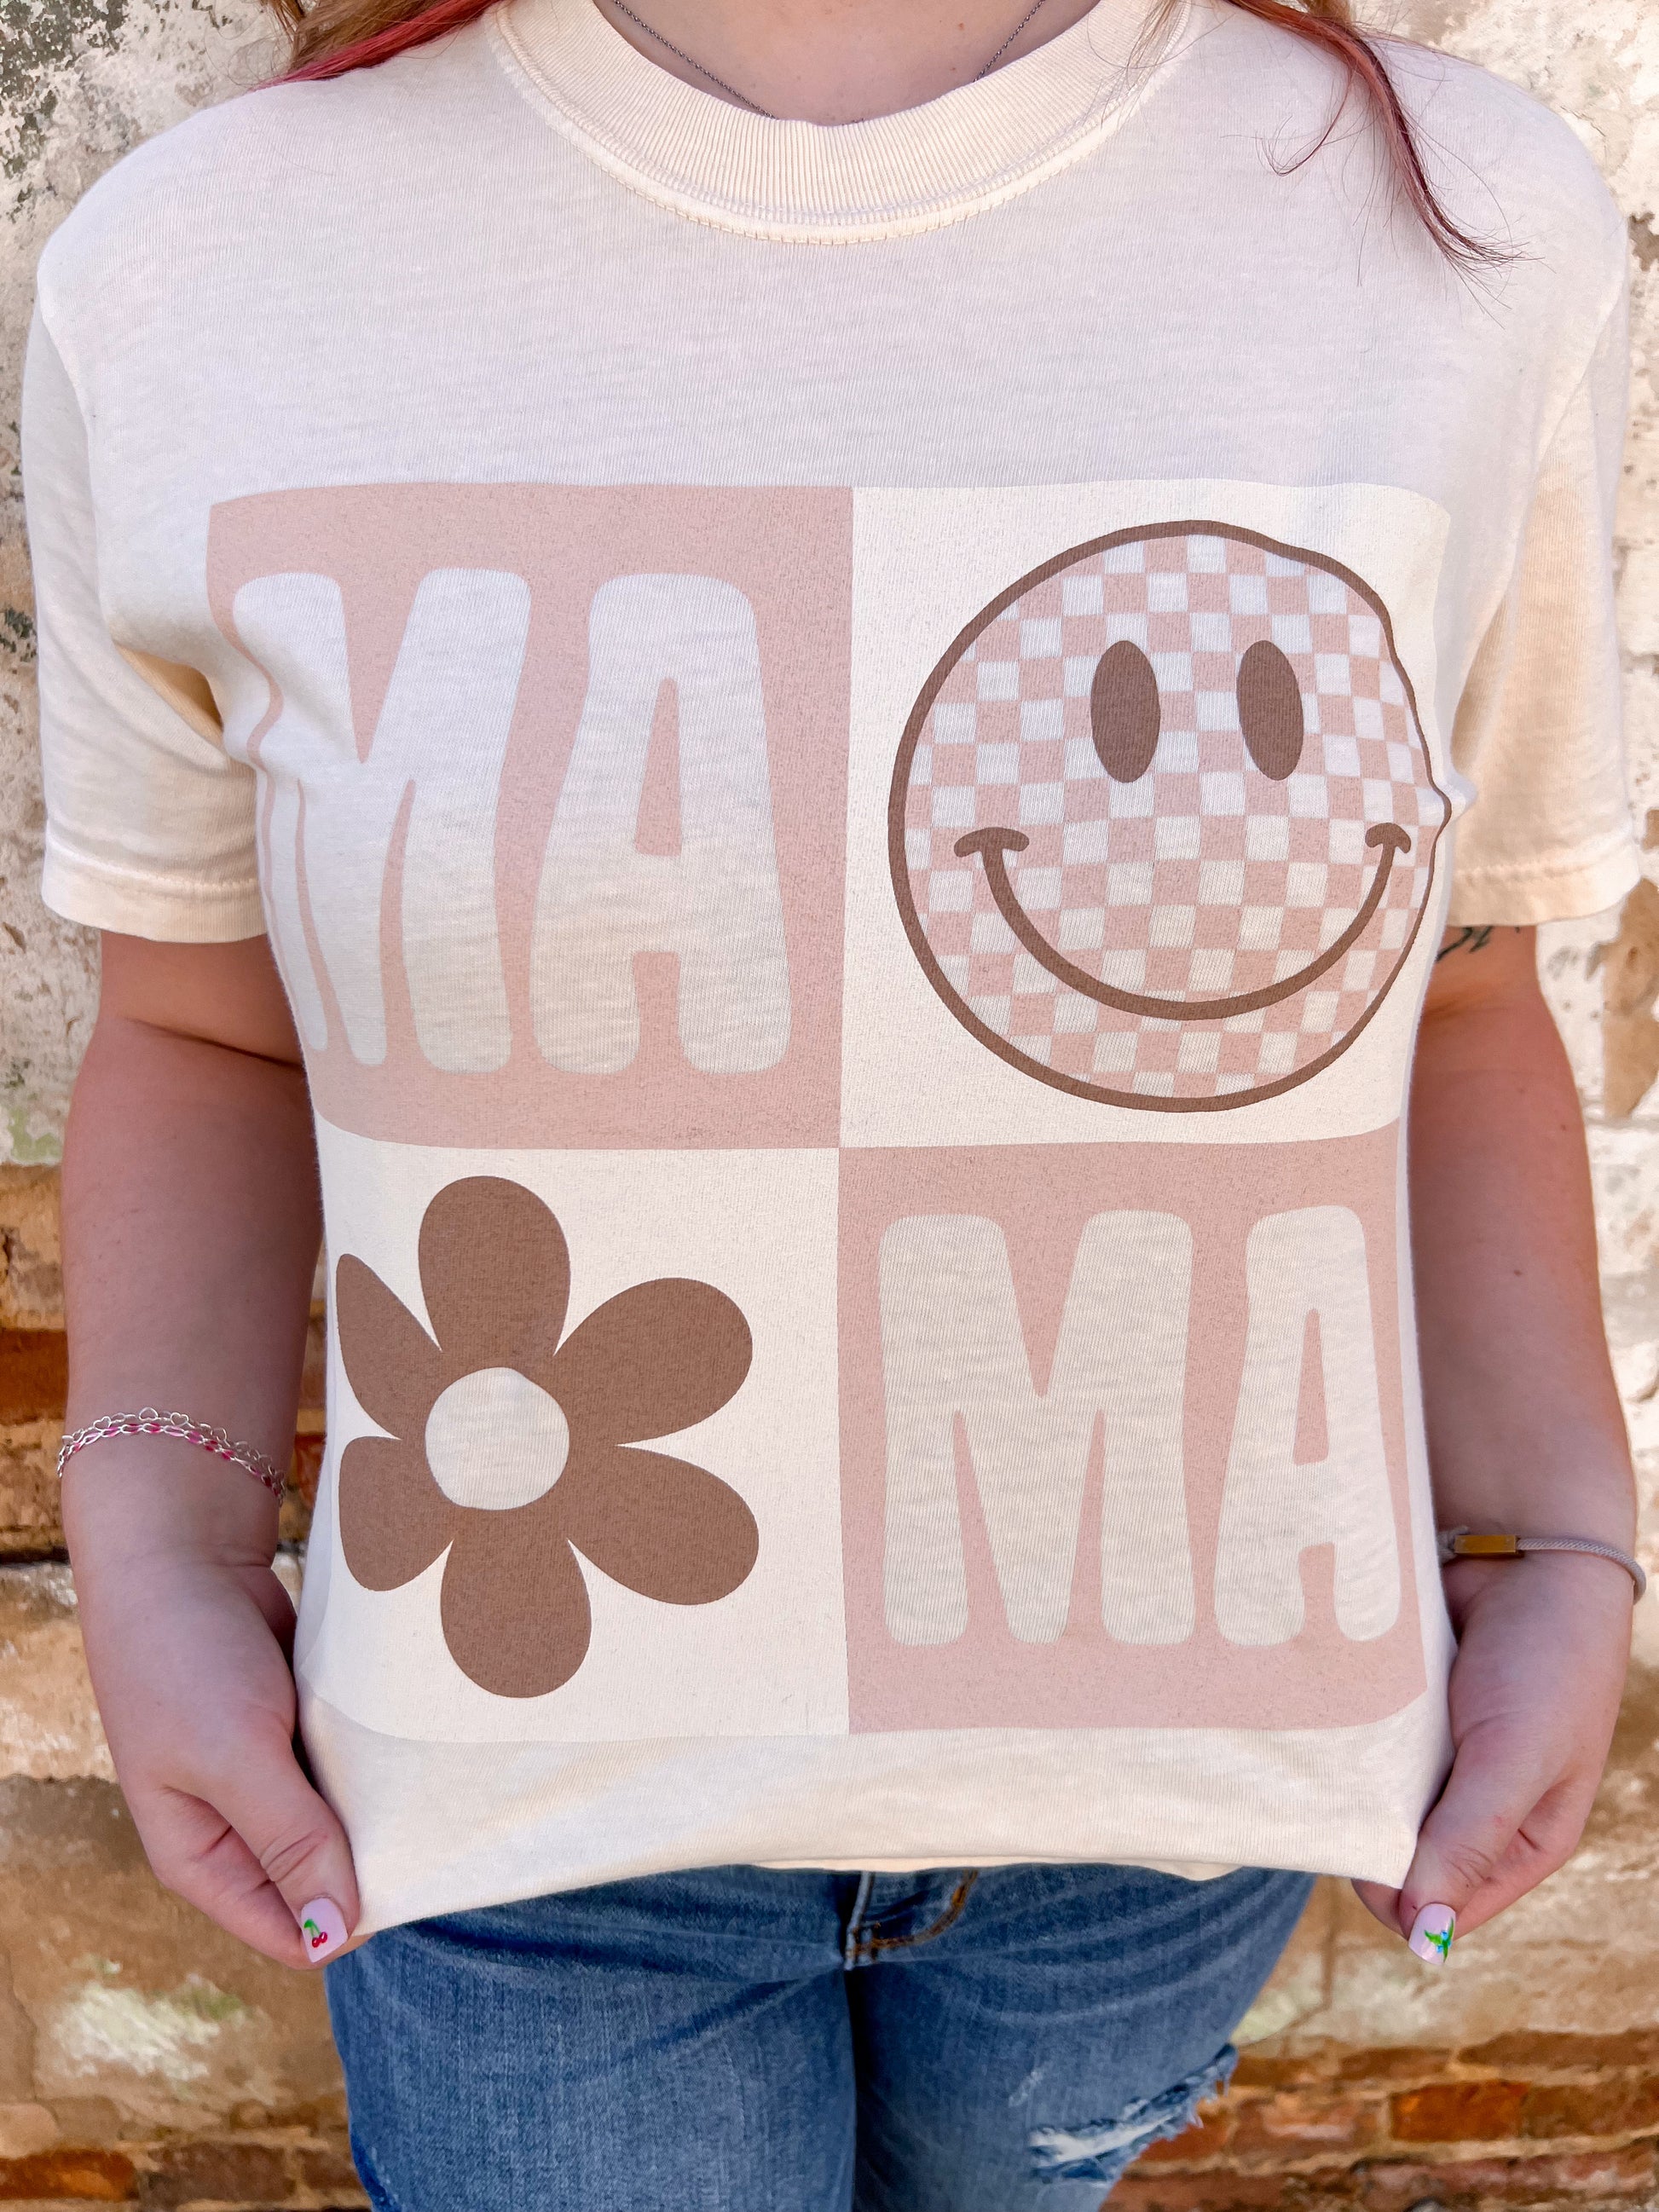 Mama Short Sleeve Tee-Apparel & Accessories-small town society-7450-MIS, BIN D2, FD 05/07/24-The Twisted Chandelier